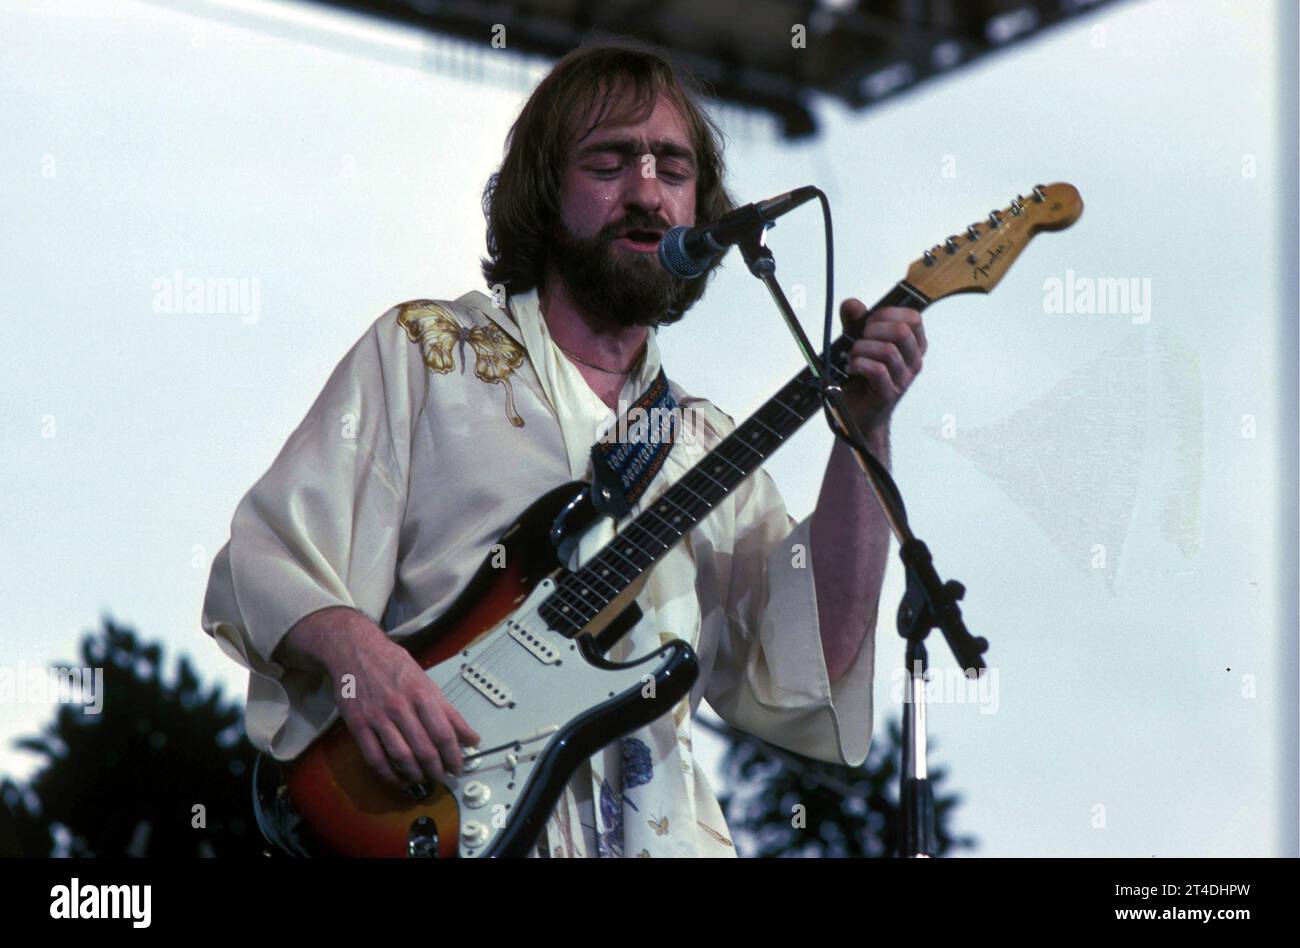 DAVE MASON ;David Thomas Mason (born 10 May 1946); English singer-songwriter and guitarist from Worcester, who first found fame with the rock band Traffic Performing Live ; March 1978 ;   Credit: Lynn Mcafee / Performing Arts Images www.performingartsimages.com Stock Photo